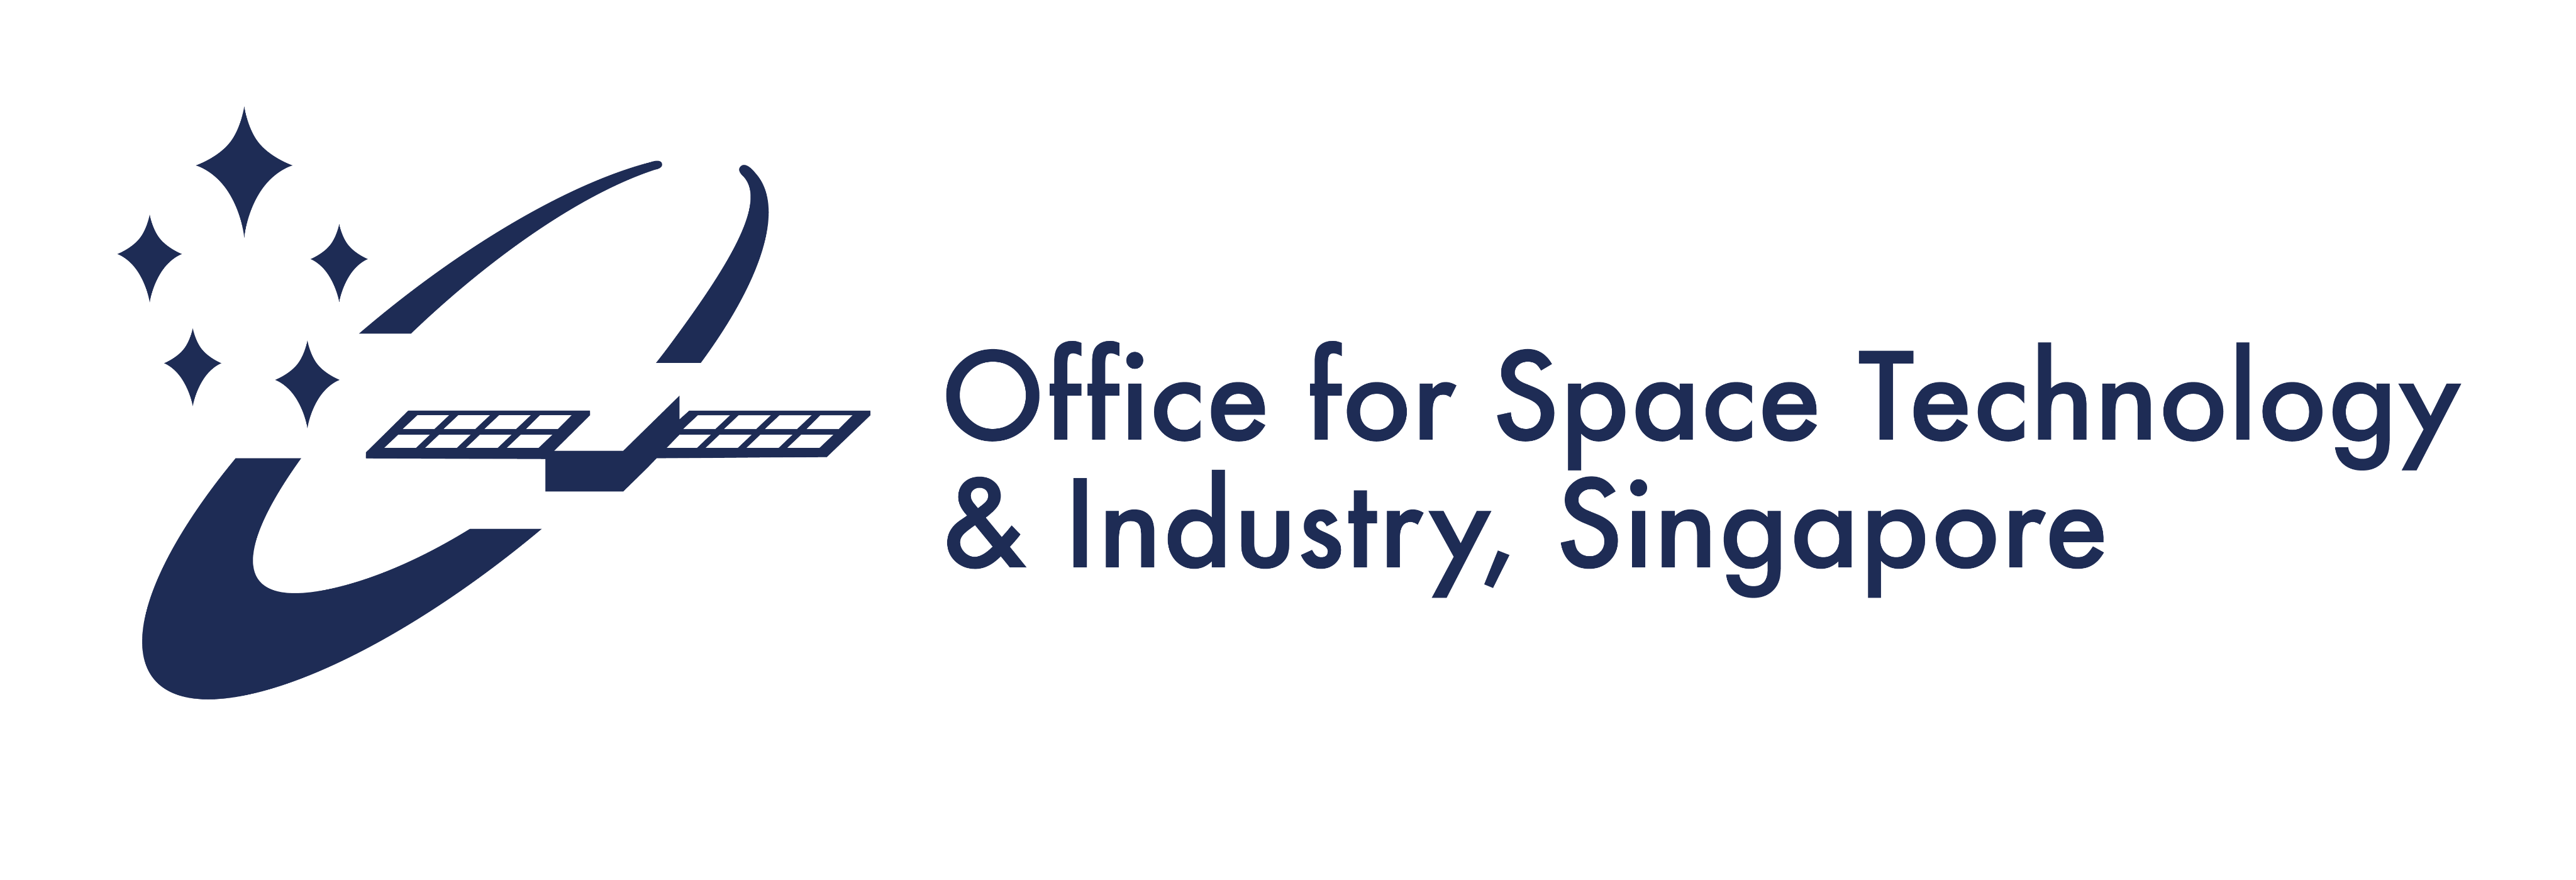 Office for Space Technology and Industry, Singapore Logo